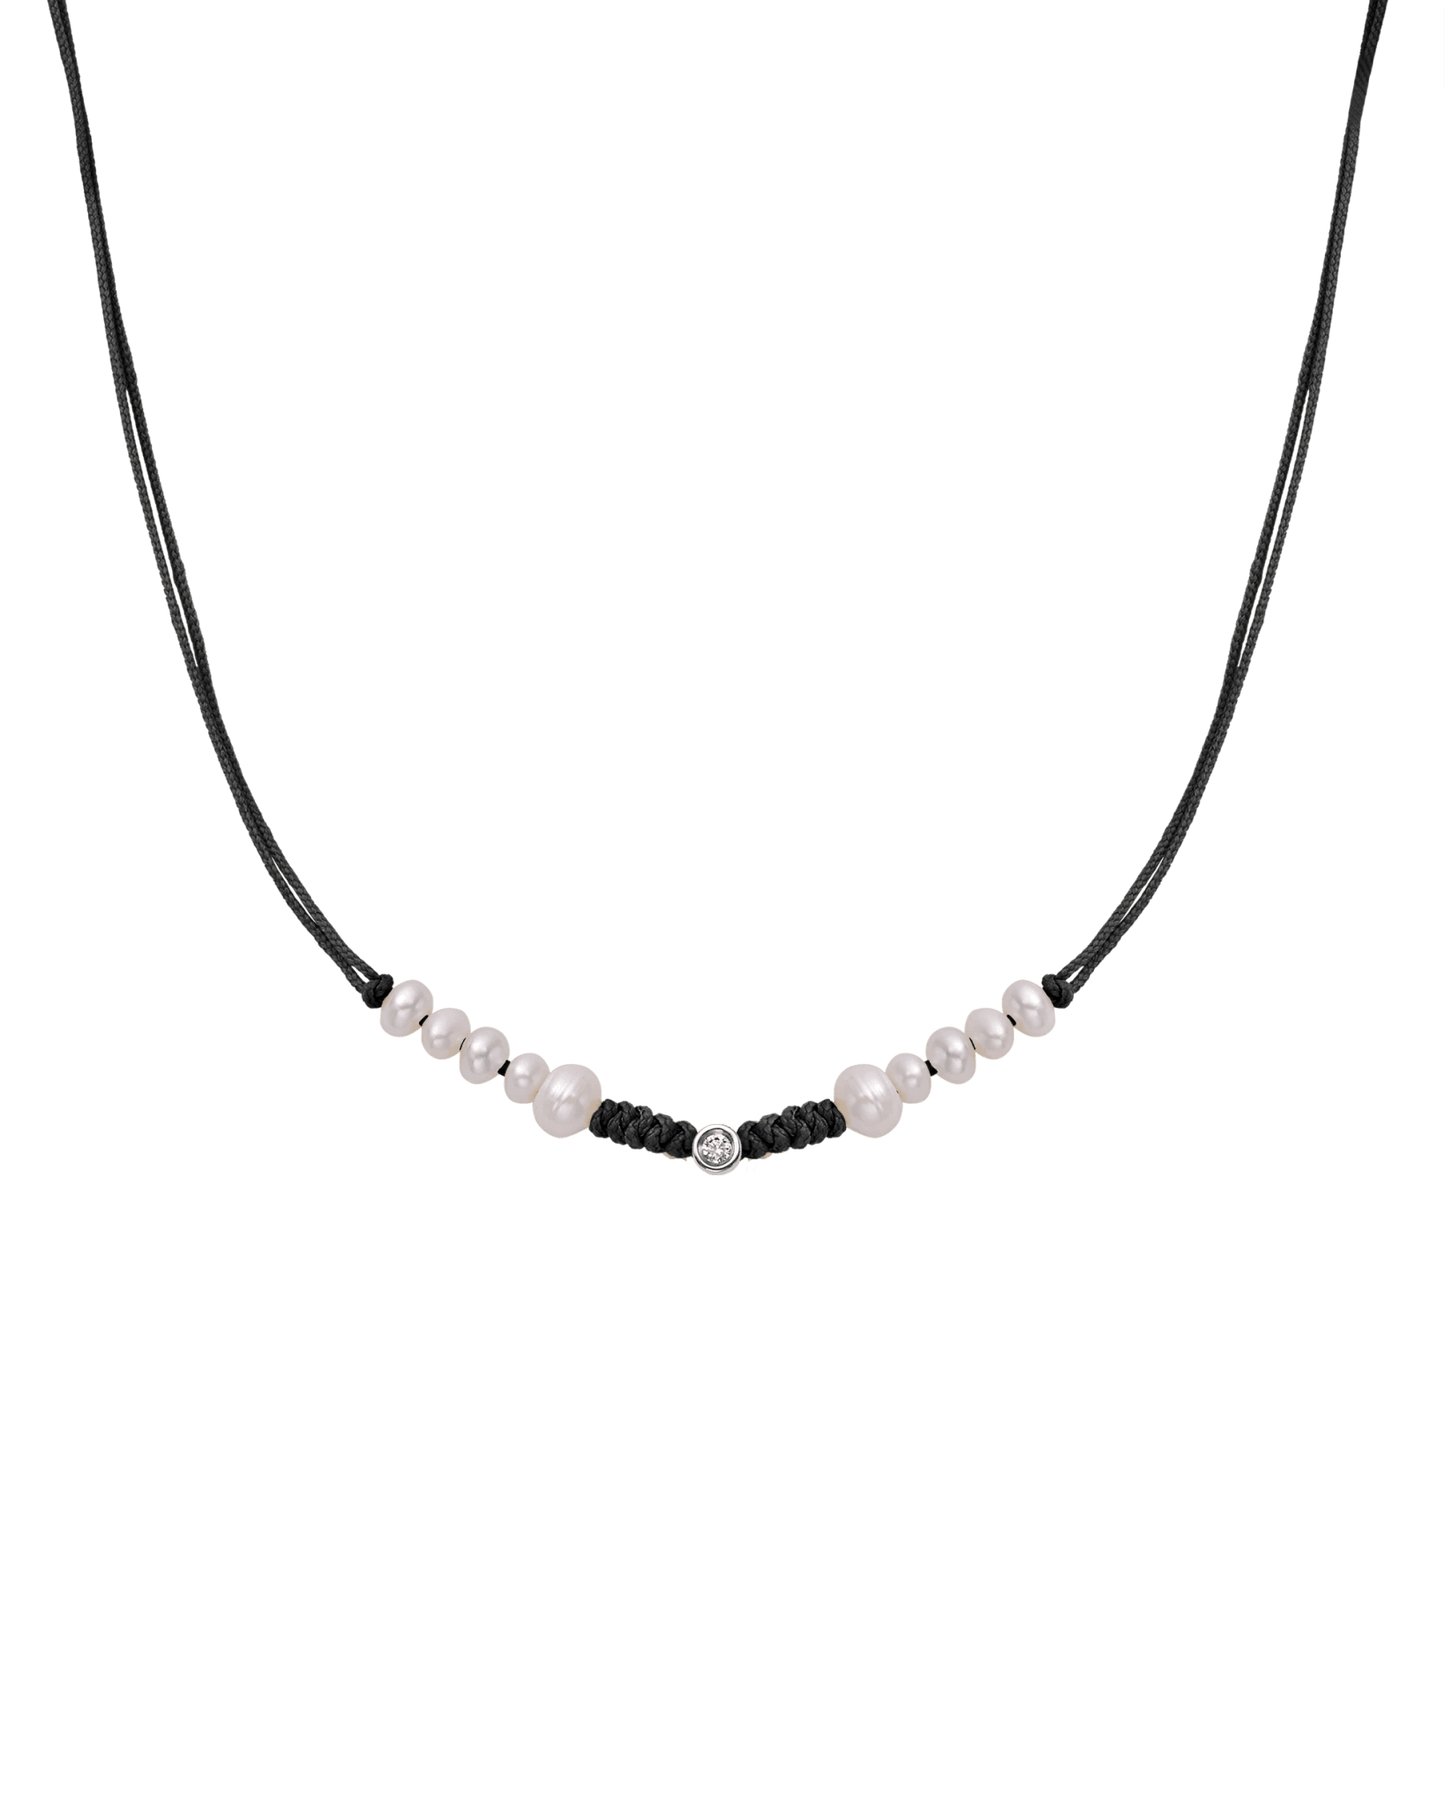 Ten Natural Pearl String of Love Necklace - 14K White Gold Necklaces 14K Solid Gold Black Small: 0.03ct 